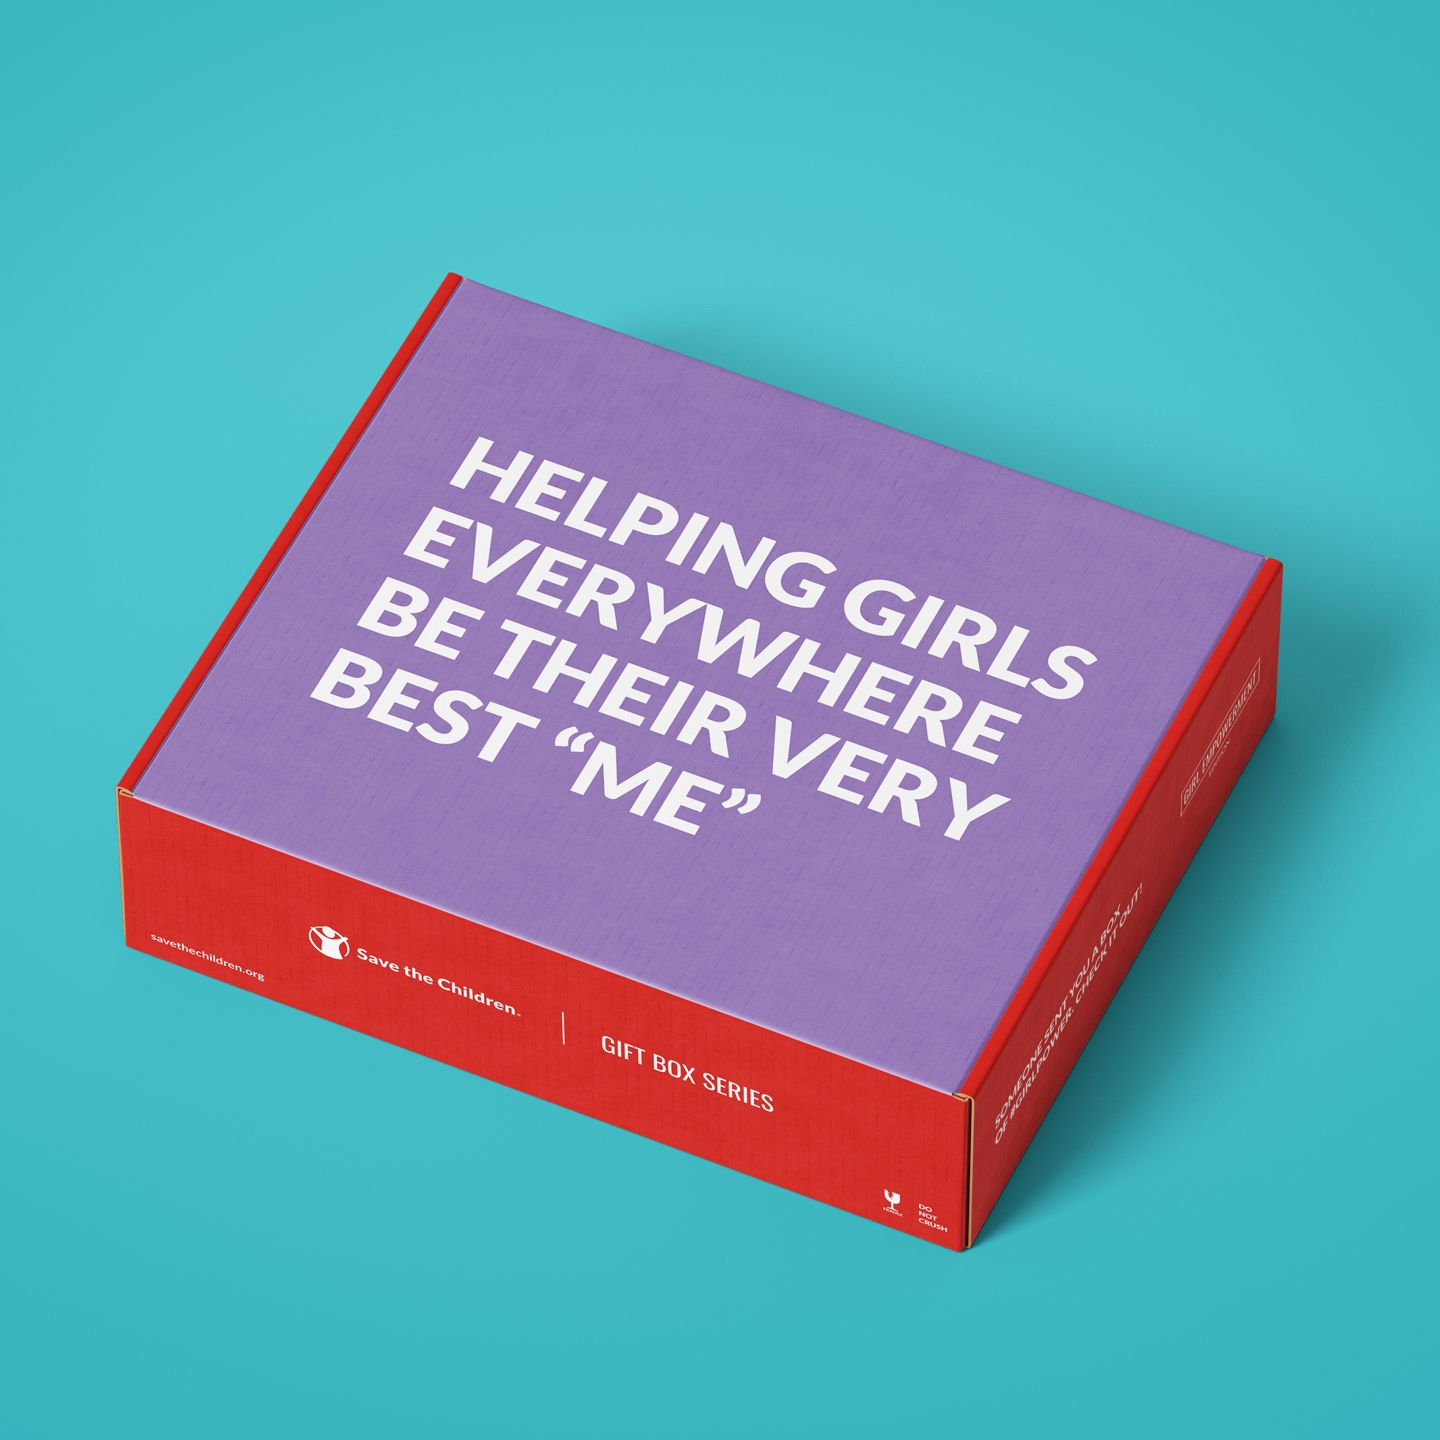 Gift Box that says: Helping Girls Everywhere be there very best Me.